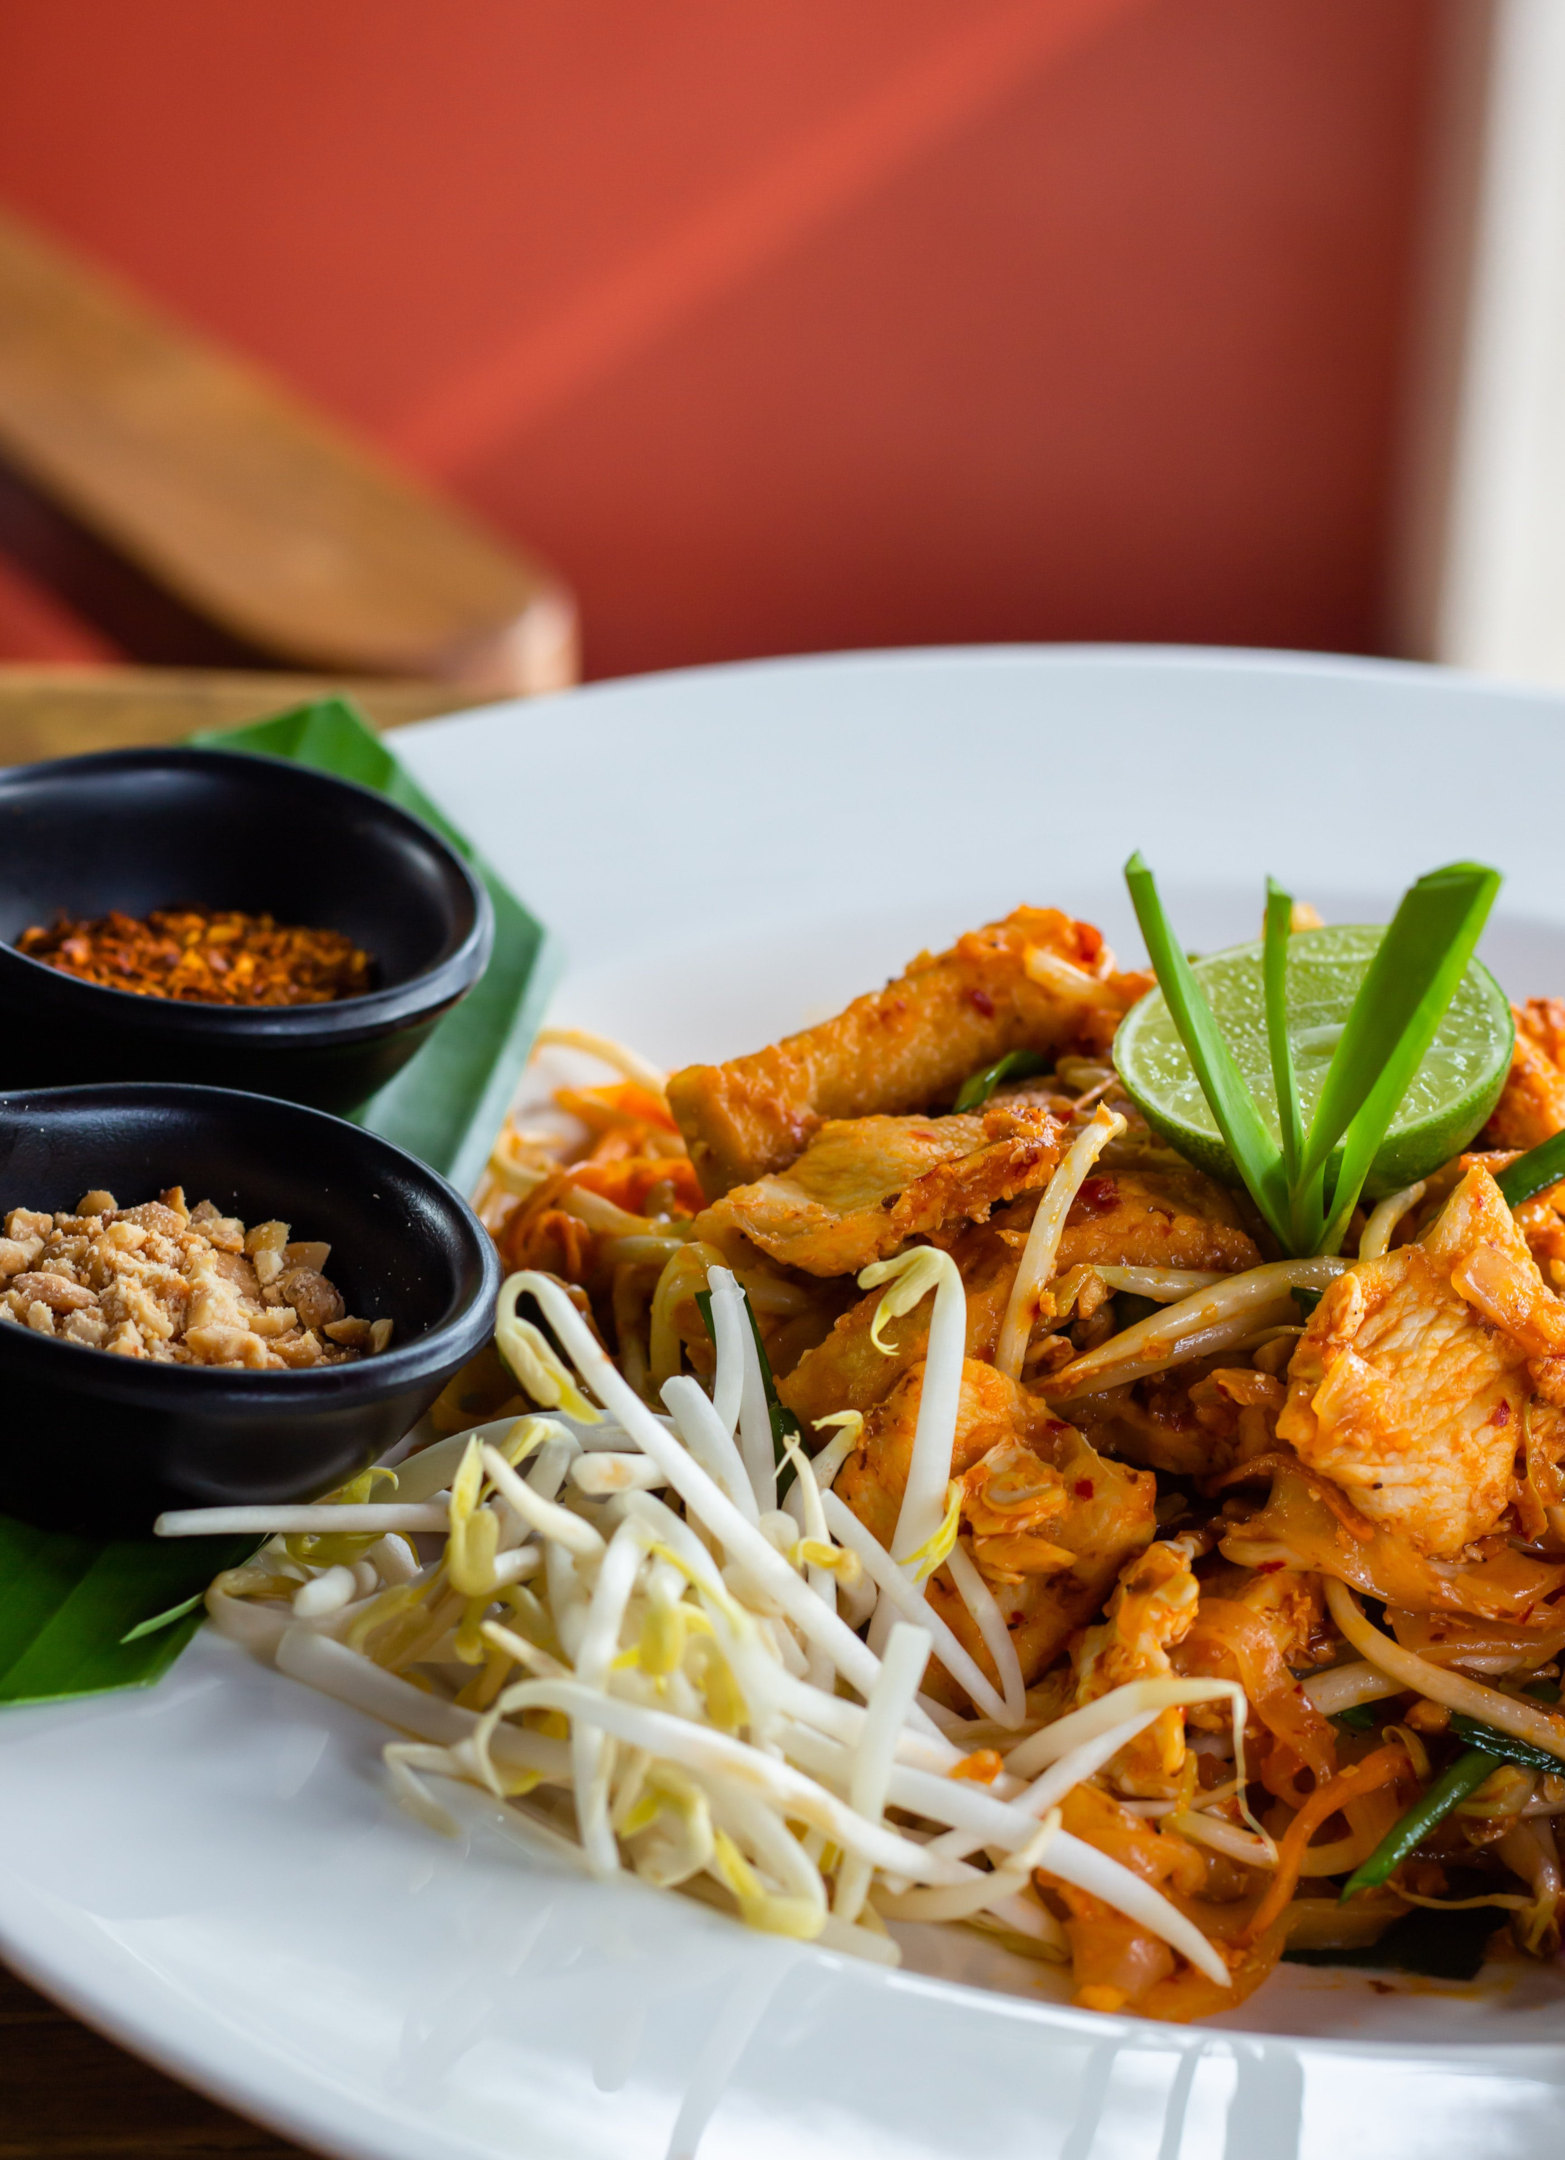 Delicious pad thai noodles garnished with fresh herbs and peanuts - a popular Thai dish for food lovers.